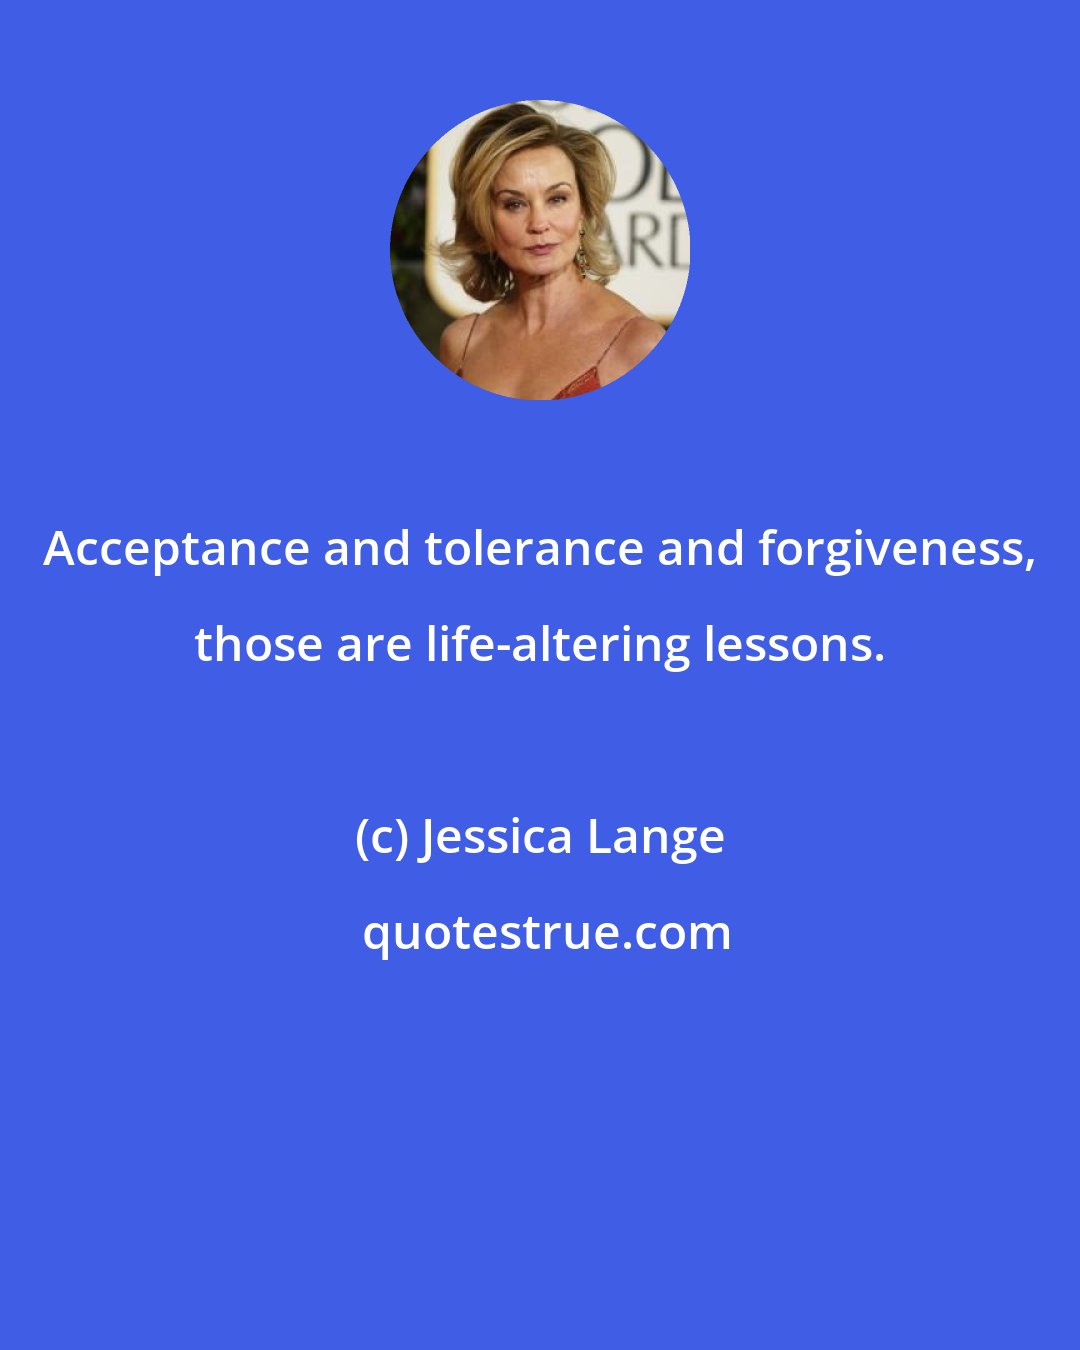 Jessica Lange: Acceptance and tolerance and forgiveness, those are life-altering lessons.